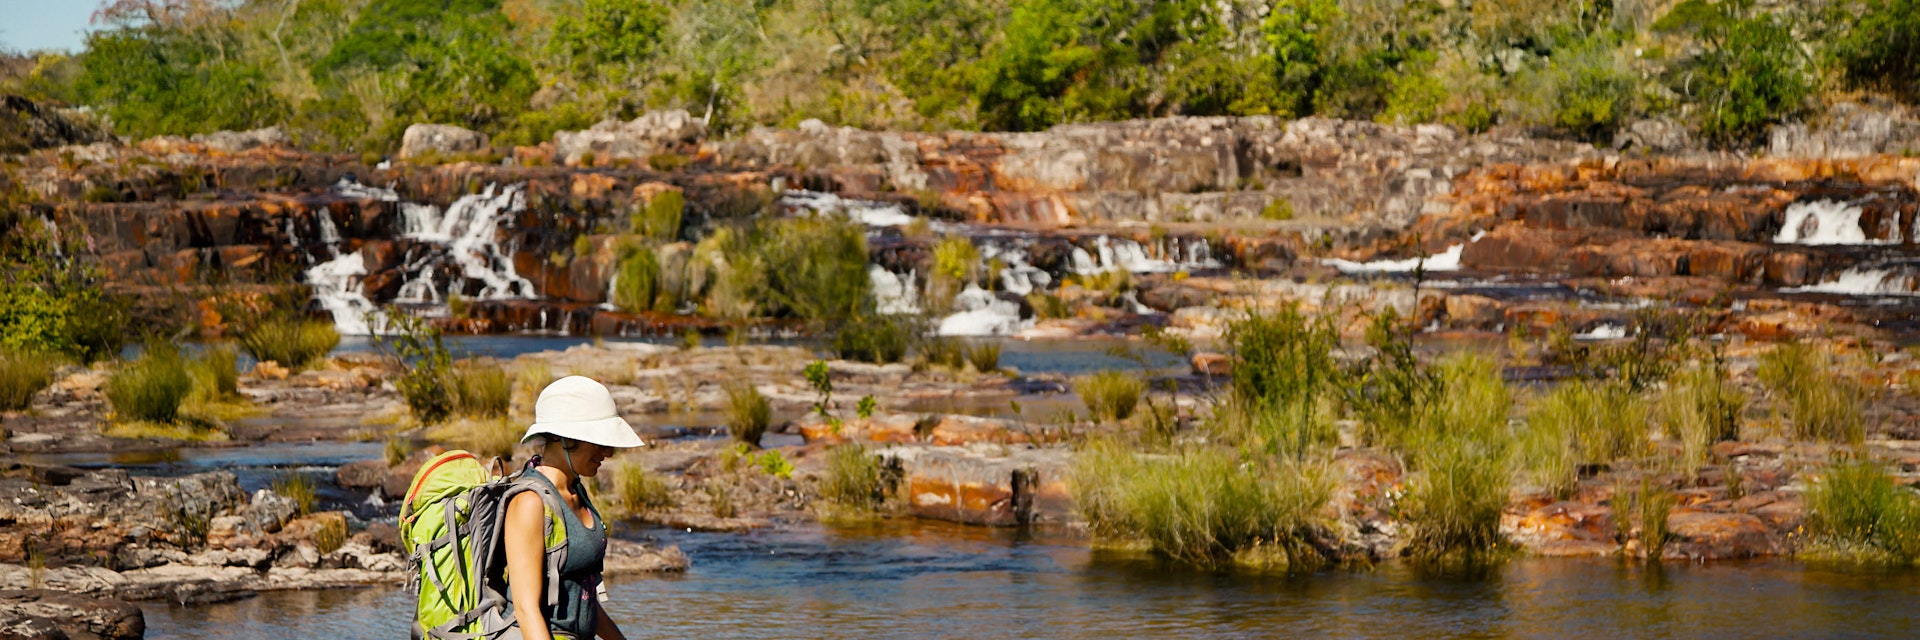 A woman hiking over rocks with a waterfall in the background at Chapada dos Veadeiros National Park.